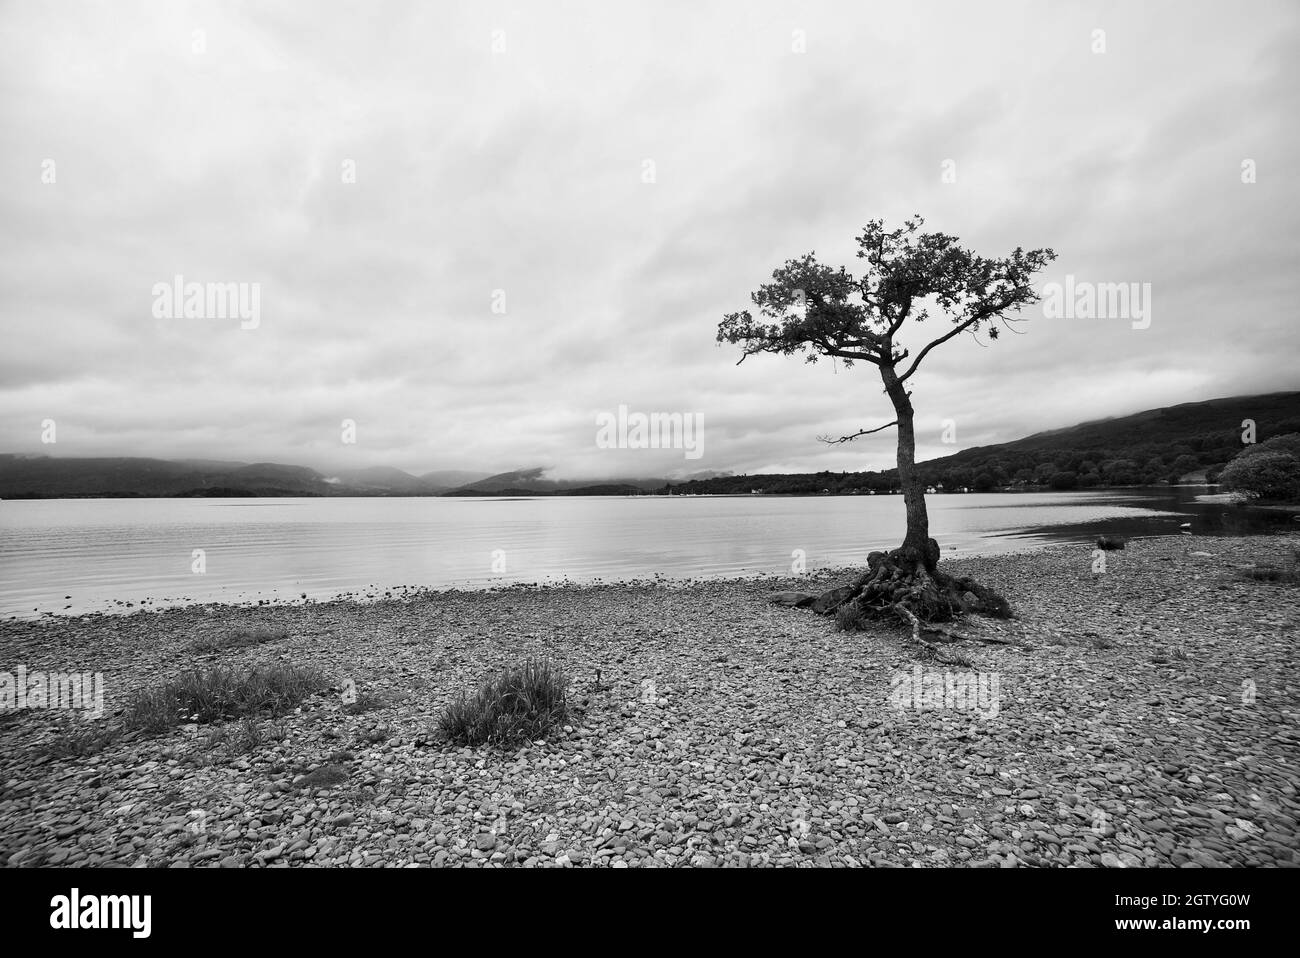 Lone tree Loch Lomond- The Lone Tree of Milarrochy is a solo Oak Tree growing on a bay on the shore of Loch Lomond, Scotland. Black and white photo. Stock Photo